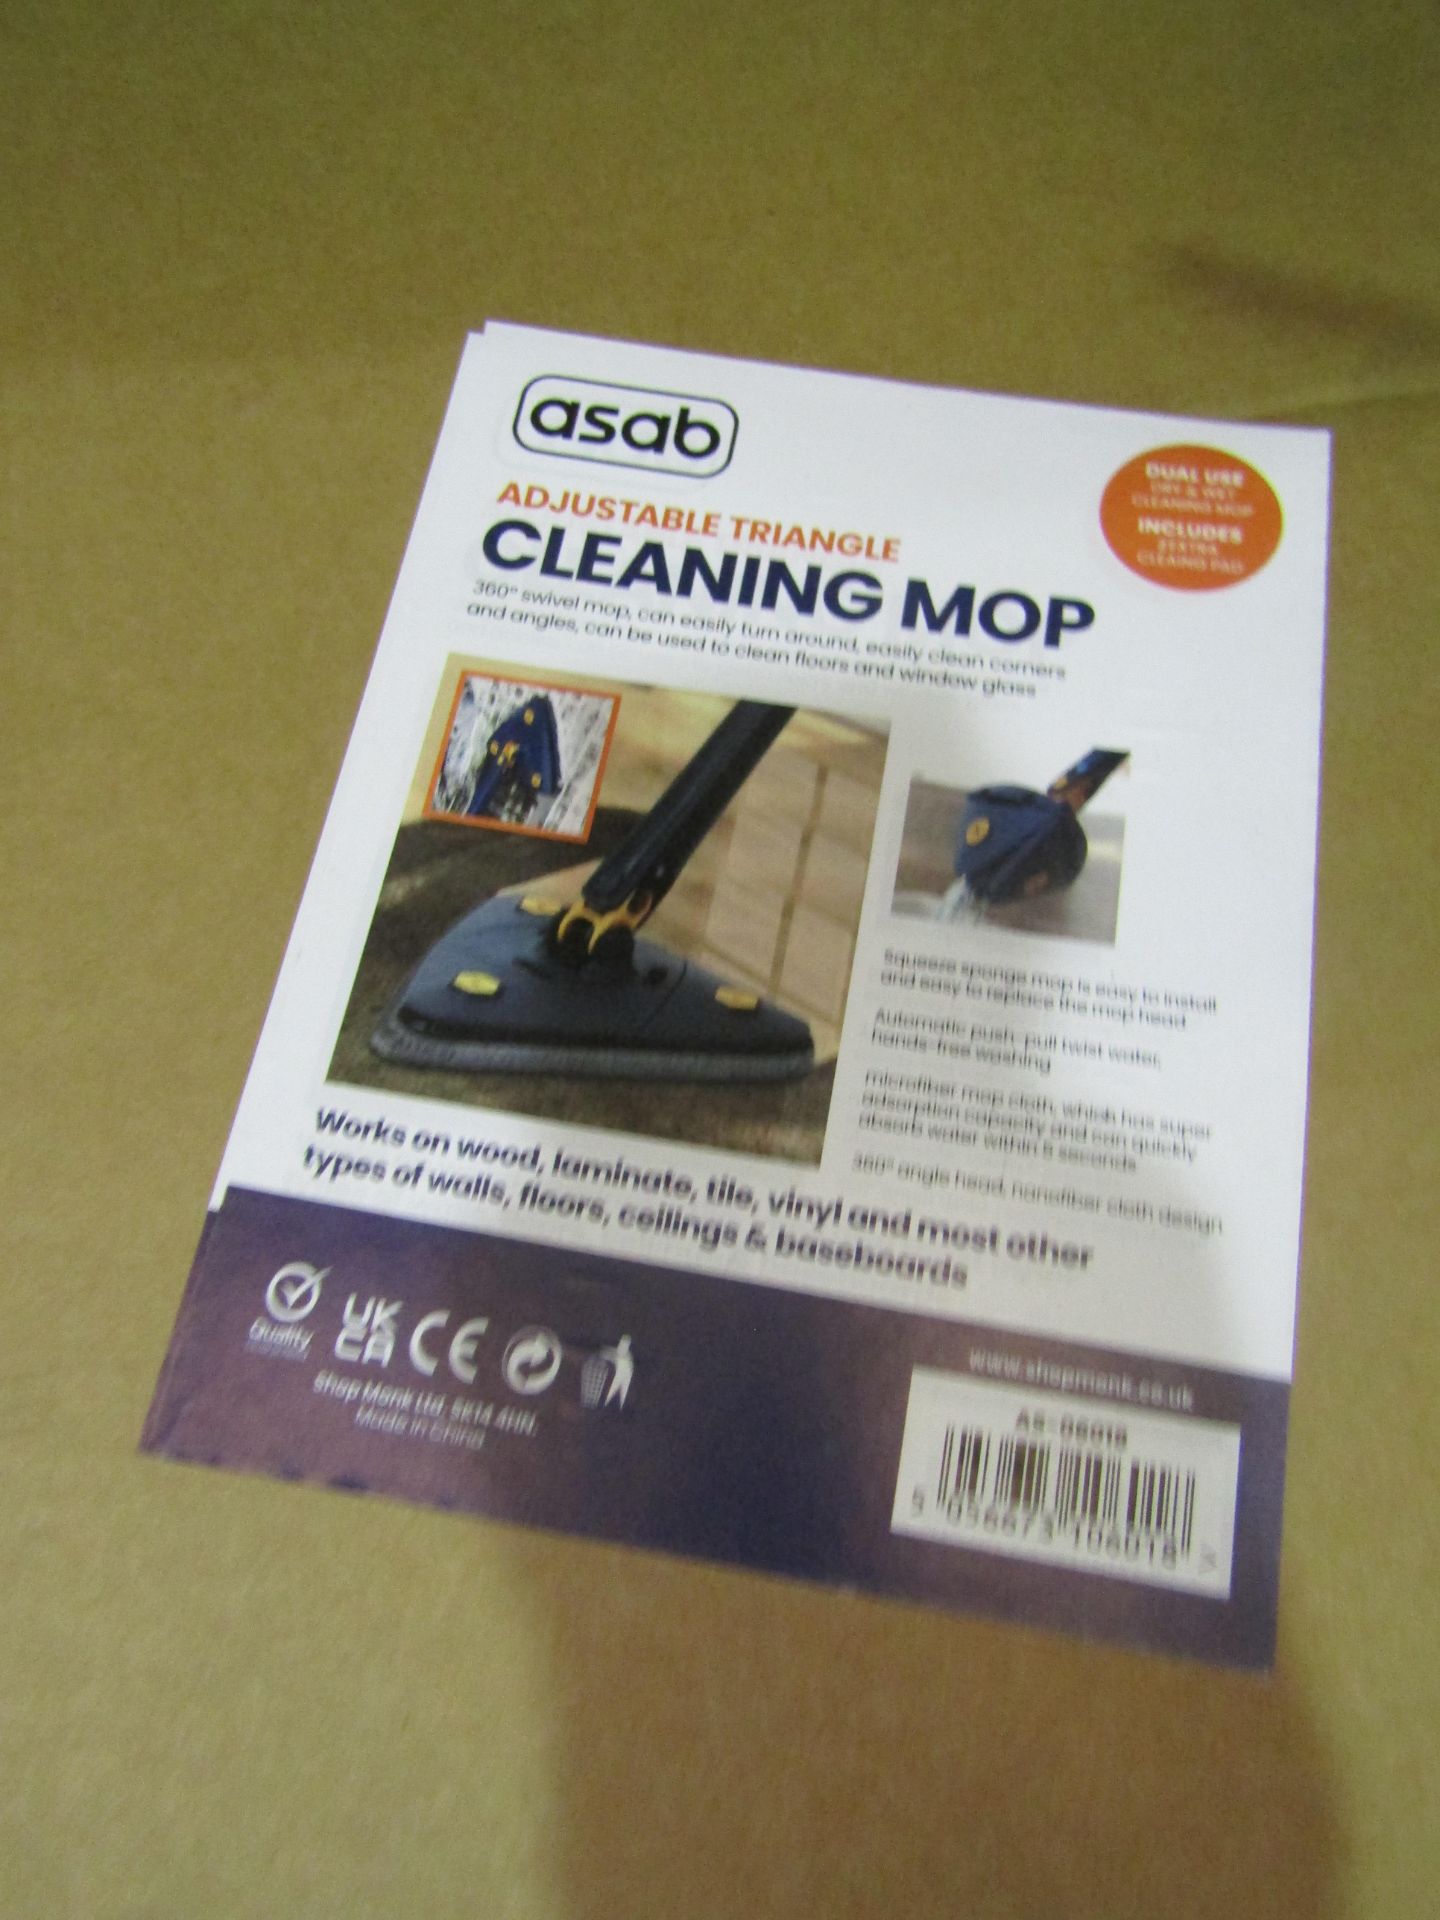 3x Asab Adjustable Triangle Cleaning Mops - Unchecked & Boxes Slightly Damaged.